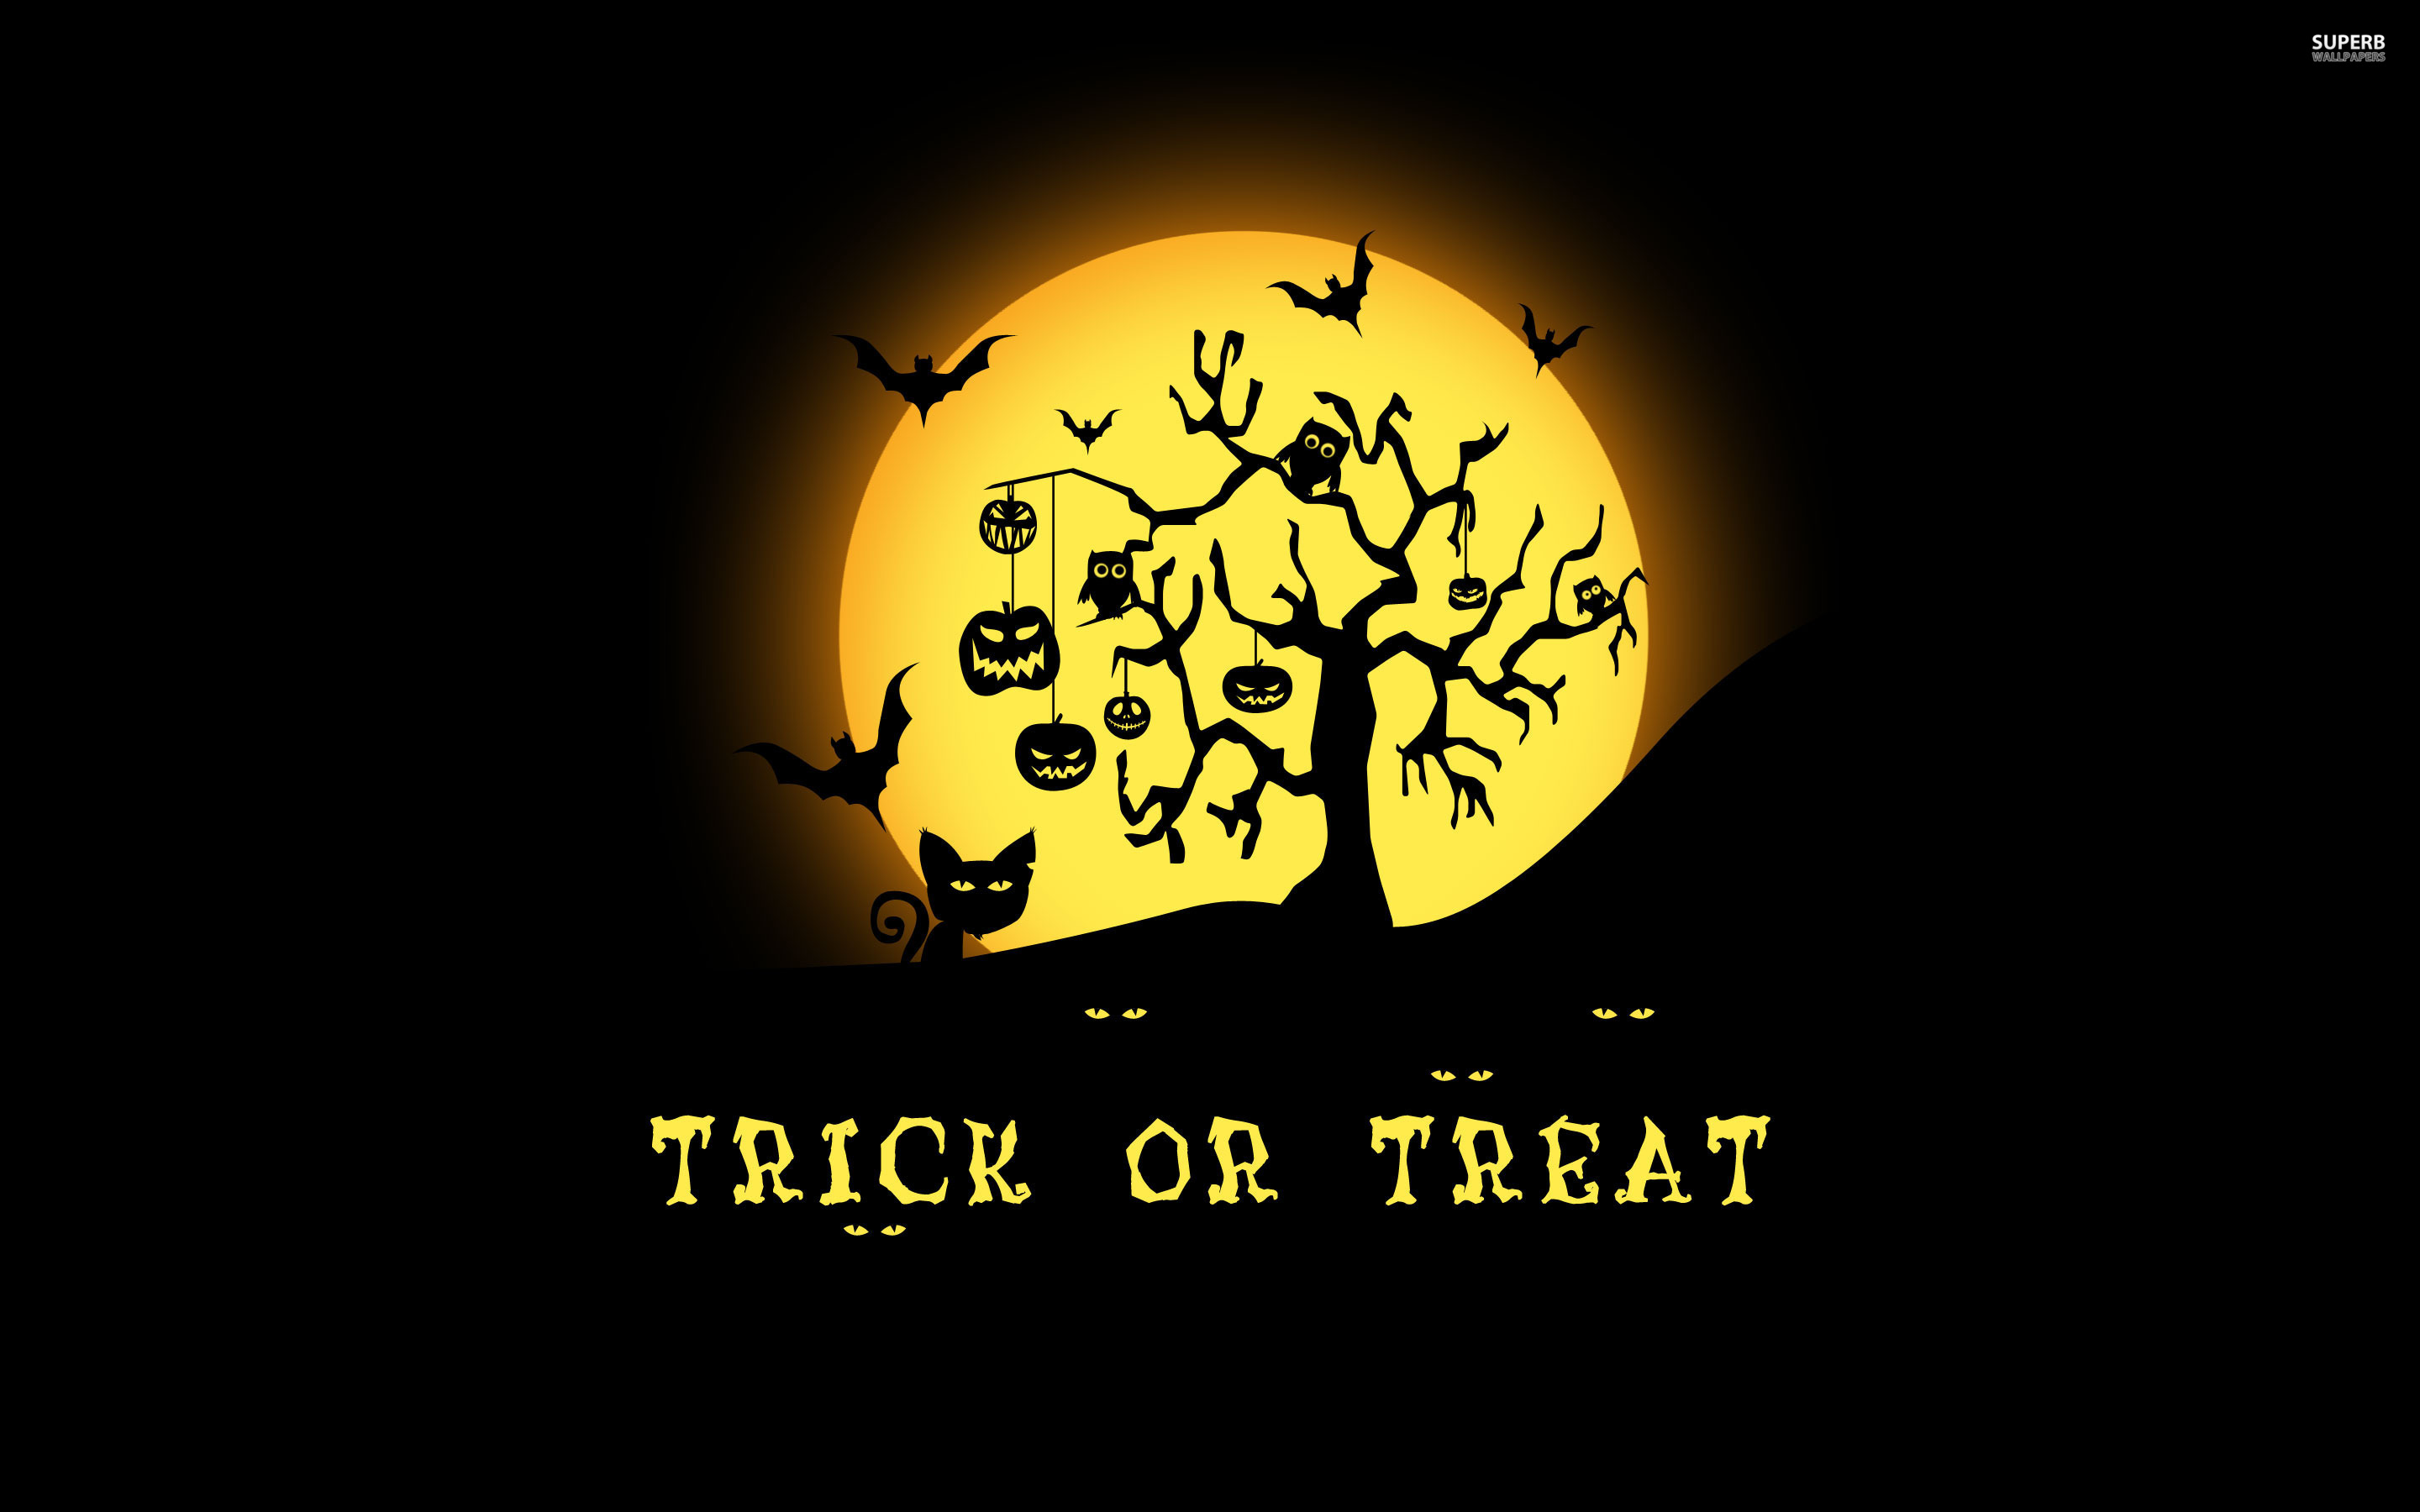 Trick or treat Desktop and mobile wallpaper Wallippo